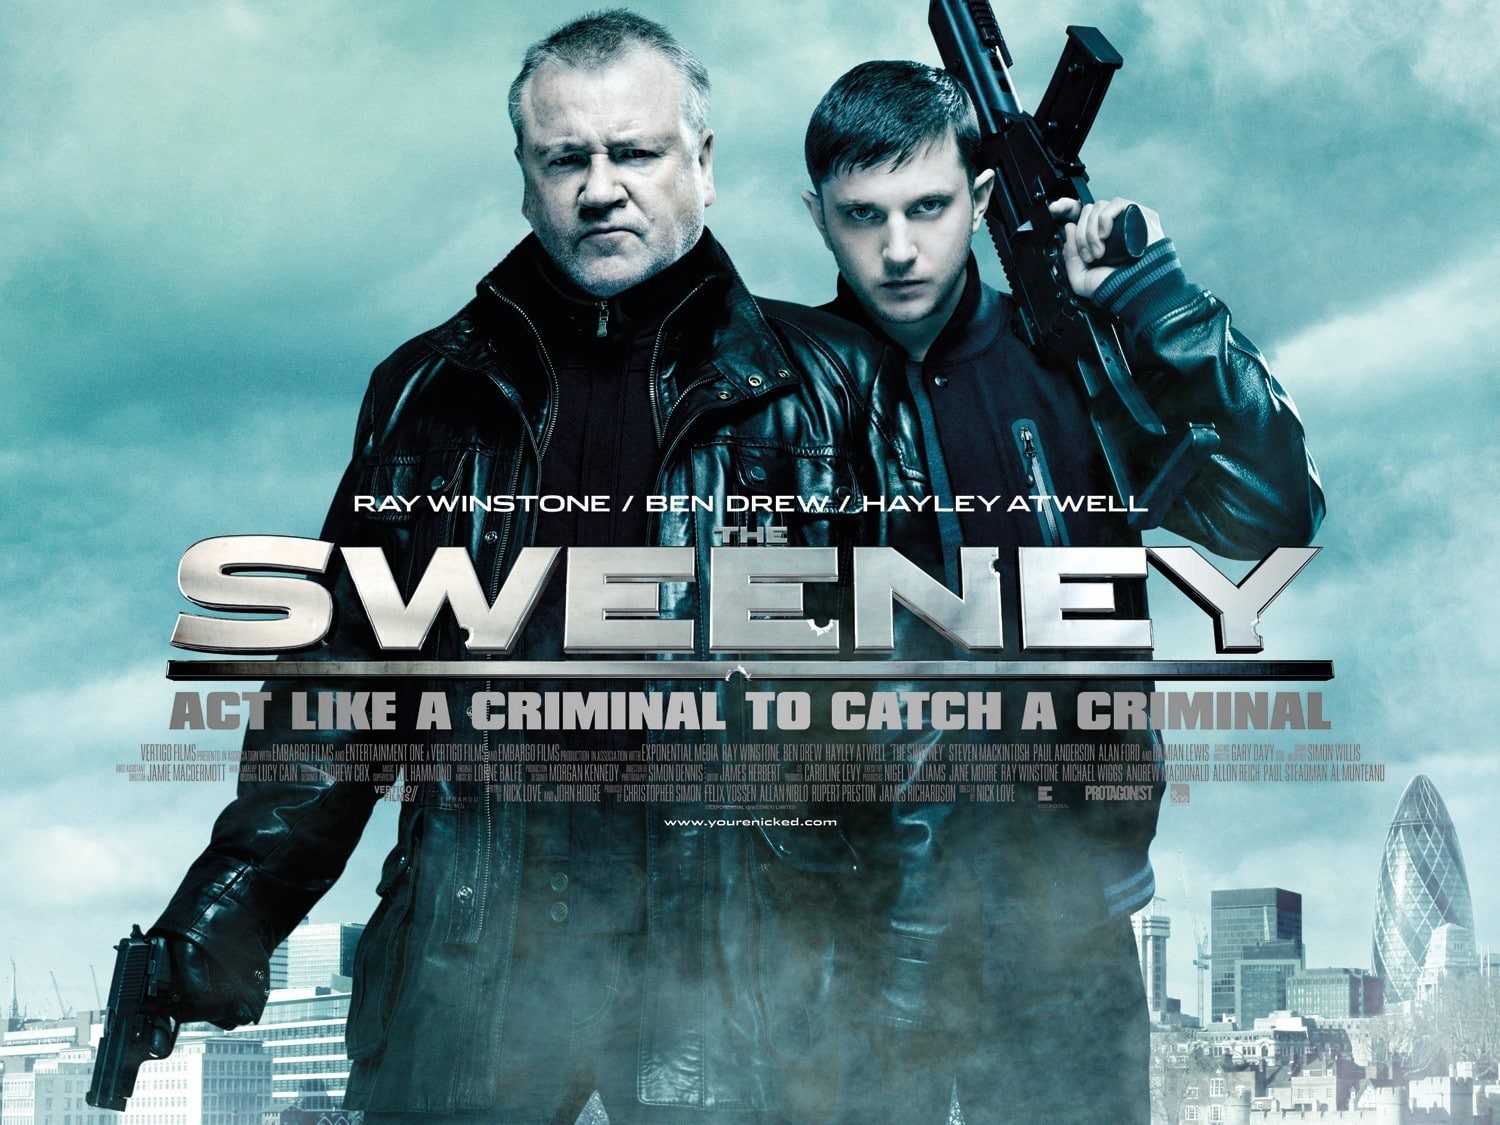 The Sweeney + The Crime + Film Movie Poster